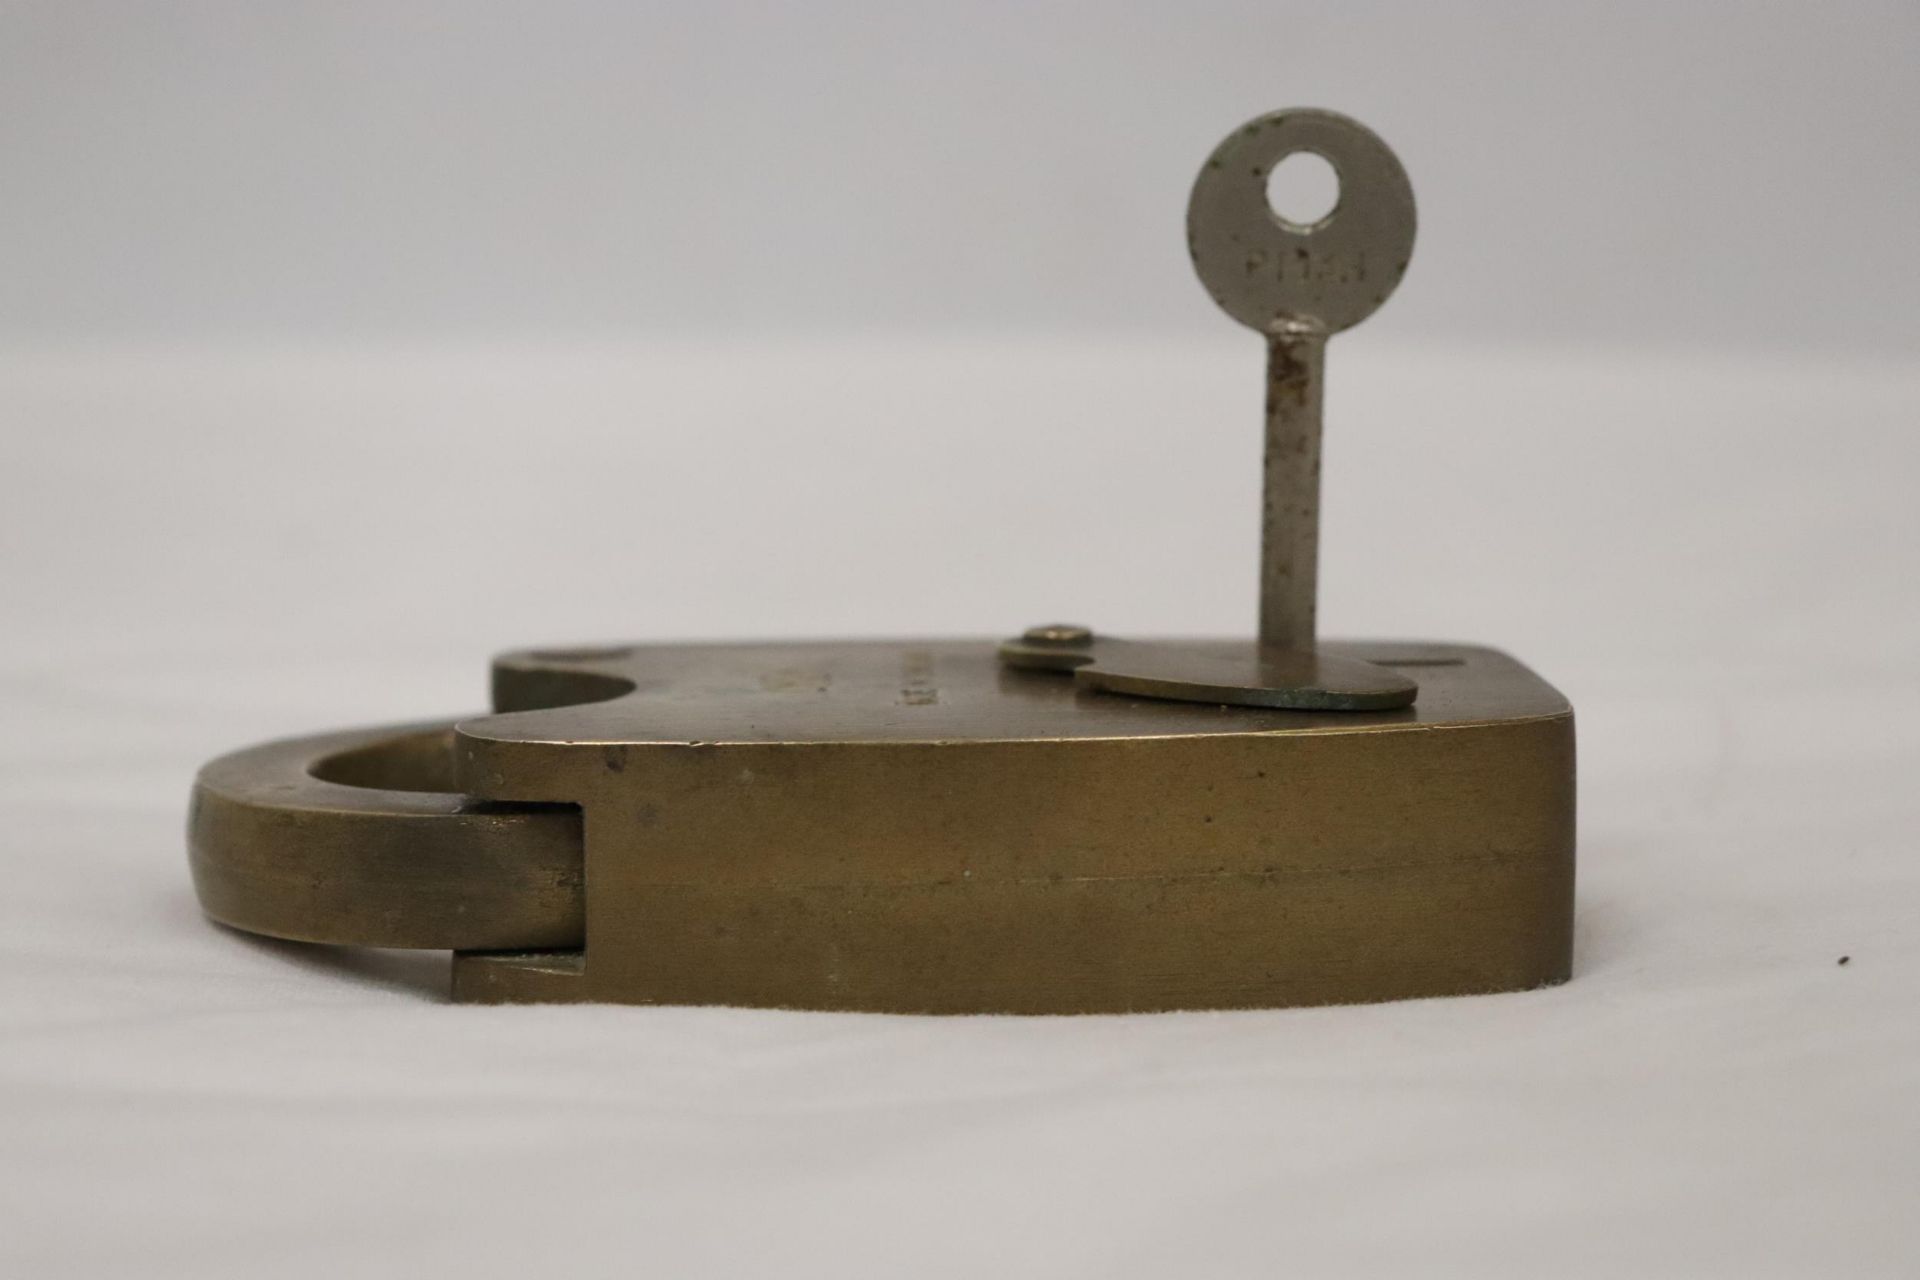 A VINTAGE BRASS UNION PADDLOCK AND KEY - 5 INCH TALL - Image 3 of 5